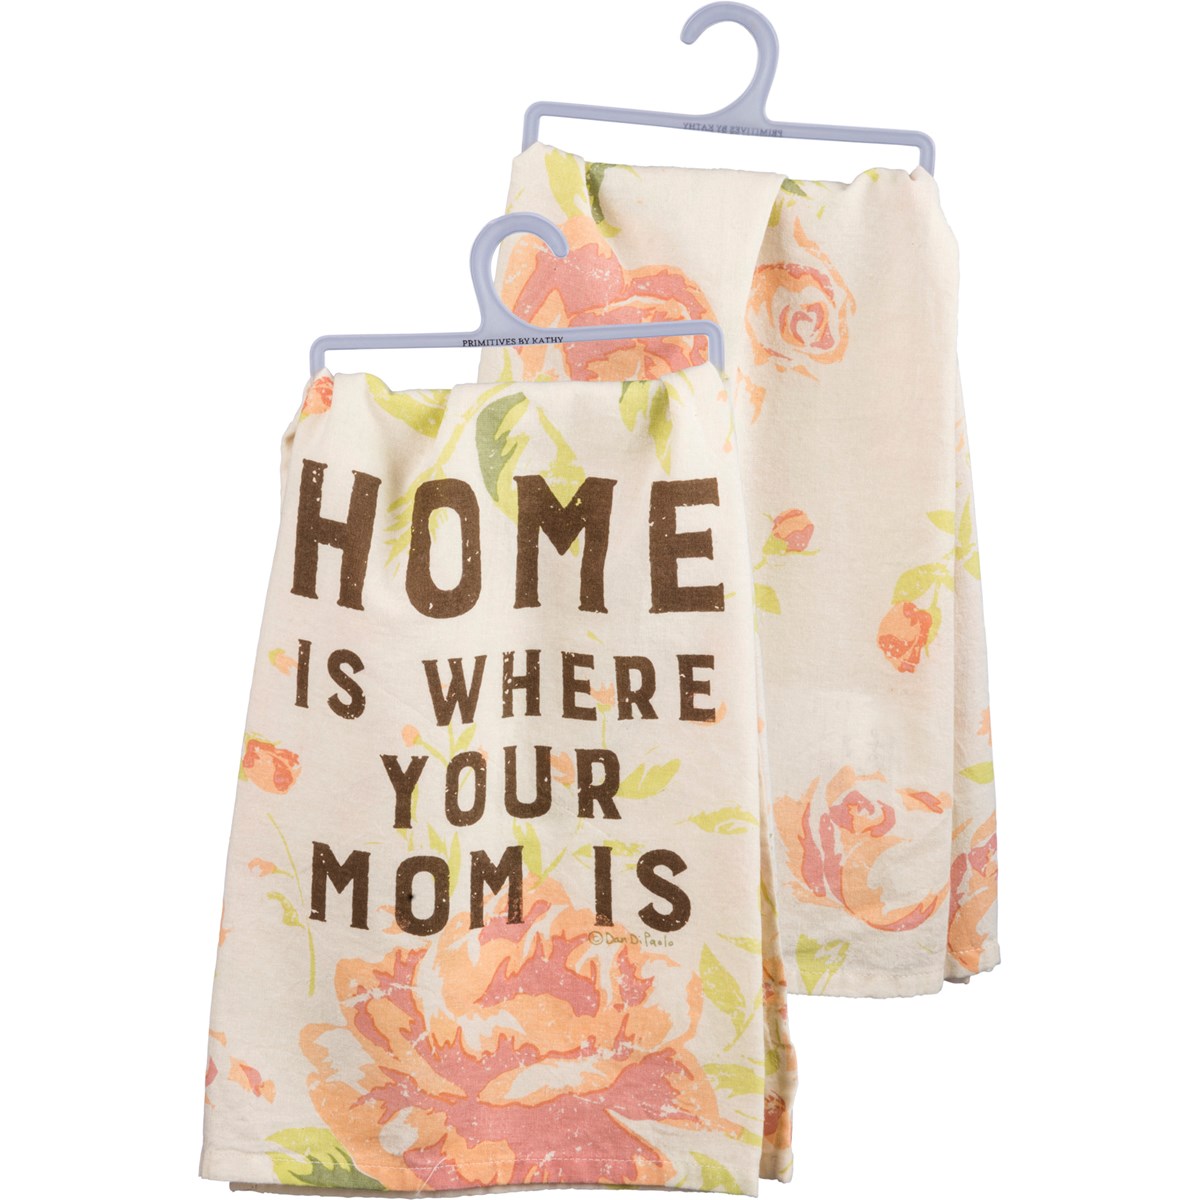 Kitchen Towel - Home Is Where Your Mom Is - 28" x 28" - Cotton